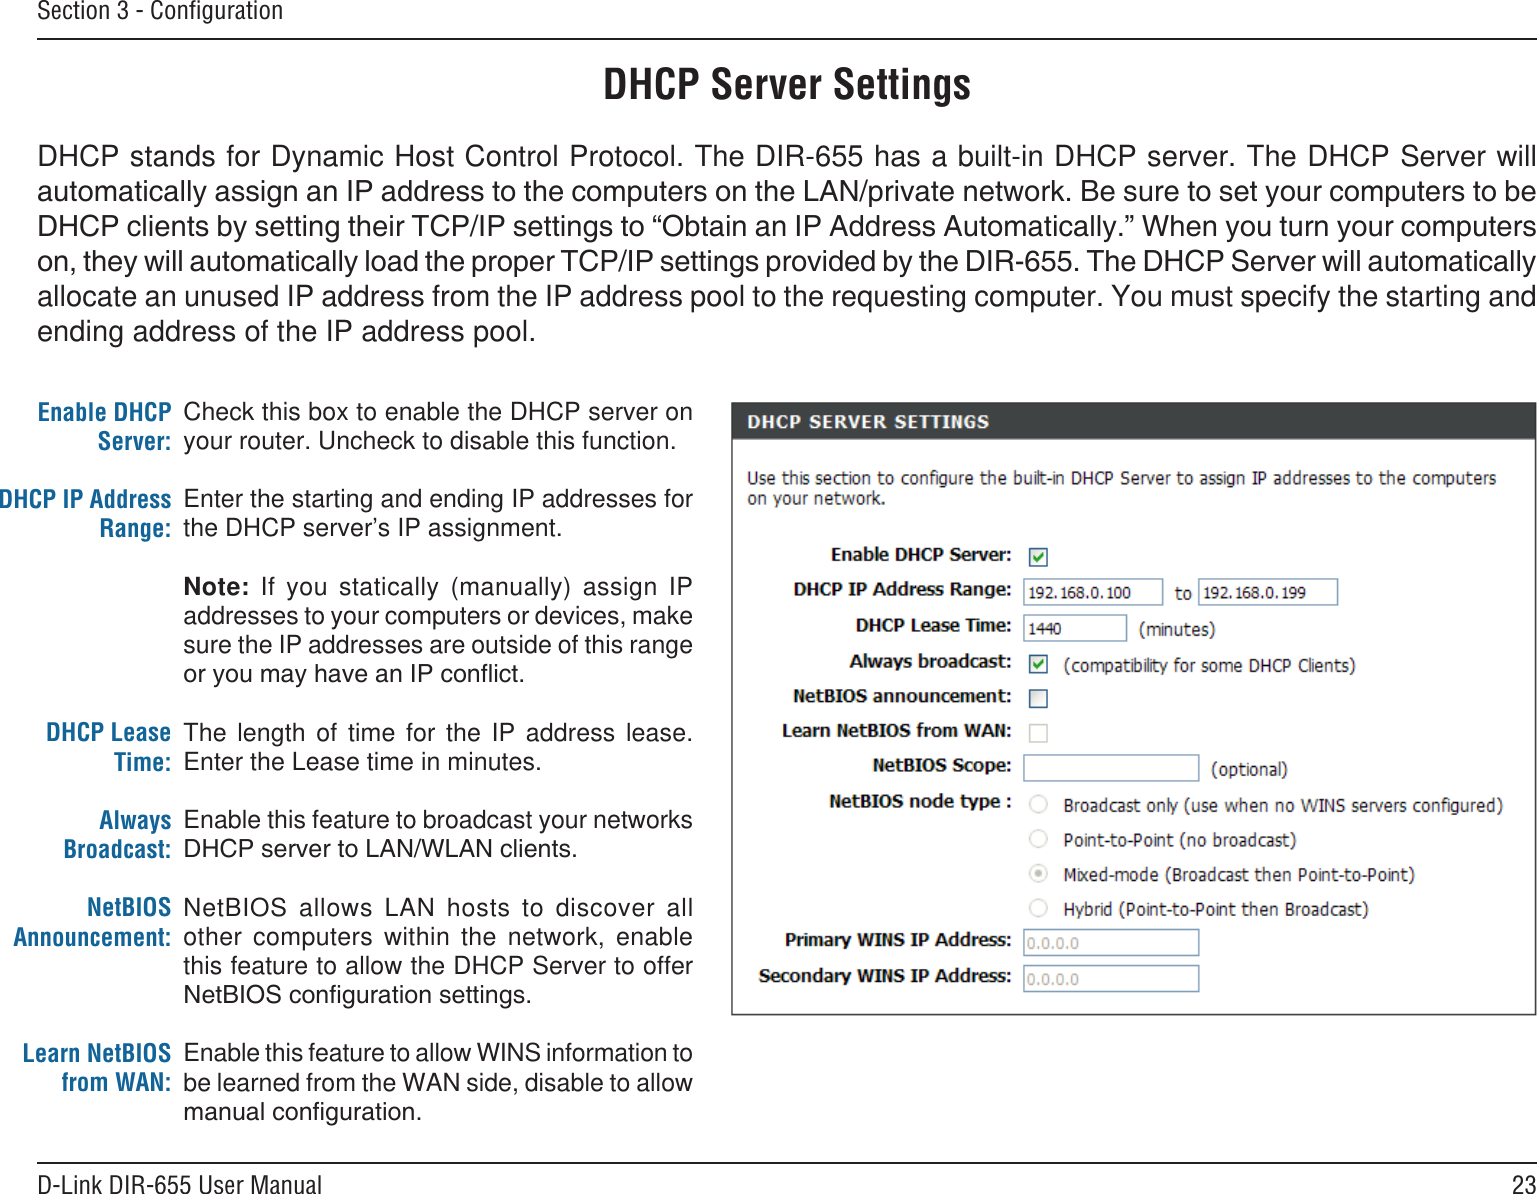 23D-Link DIR-655 User ManualSection 3 - ConﬁgurationDHCP Server SettingsDHCP stands for Dynamic Host Control Protocol. The DIR-655 has a built-in DHCP server. The DHCP Server will allocate an unused IP address from the IP address pool to the requesting computer. You must specify the starting and ending address of the IP address pool.Check this box to enable the DHCP server on your router. Uncheck to disable this function.Enter the starting and ending IP addresses for the DHCP server’s IP assignment.Note:  If  you  statically  (manually)  assign  IP addresses to your computers or devices, make sure the IP addresses are outside of this range The  length  of  time  for  the  IP  address  lease. Enter the Lease time in minutes.Enable this feature to broadcast your networks NetBIOS  allows  LAN  hosts  to  discover  all other  computers  within  the  network,  enable this feature to allow the DHCP Server to offer Enable this feature to allow WINS information to be learned from the WAN side, disable to allow Enable DHCP Server:DHCP IP Address Range:DHCP Lease Time:Always Broadcast:NetBIOS Announcement:Learn NetBIOS from WAN: